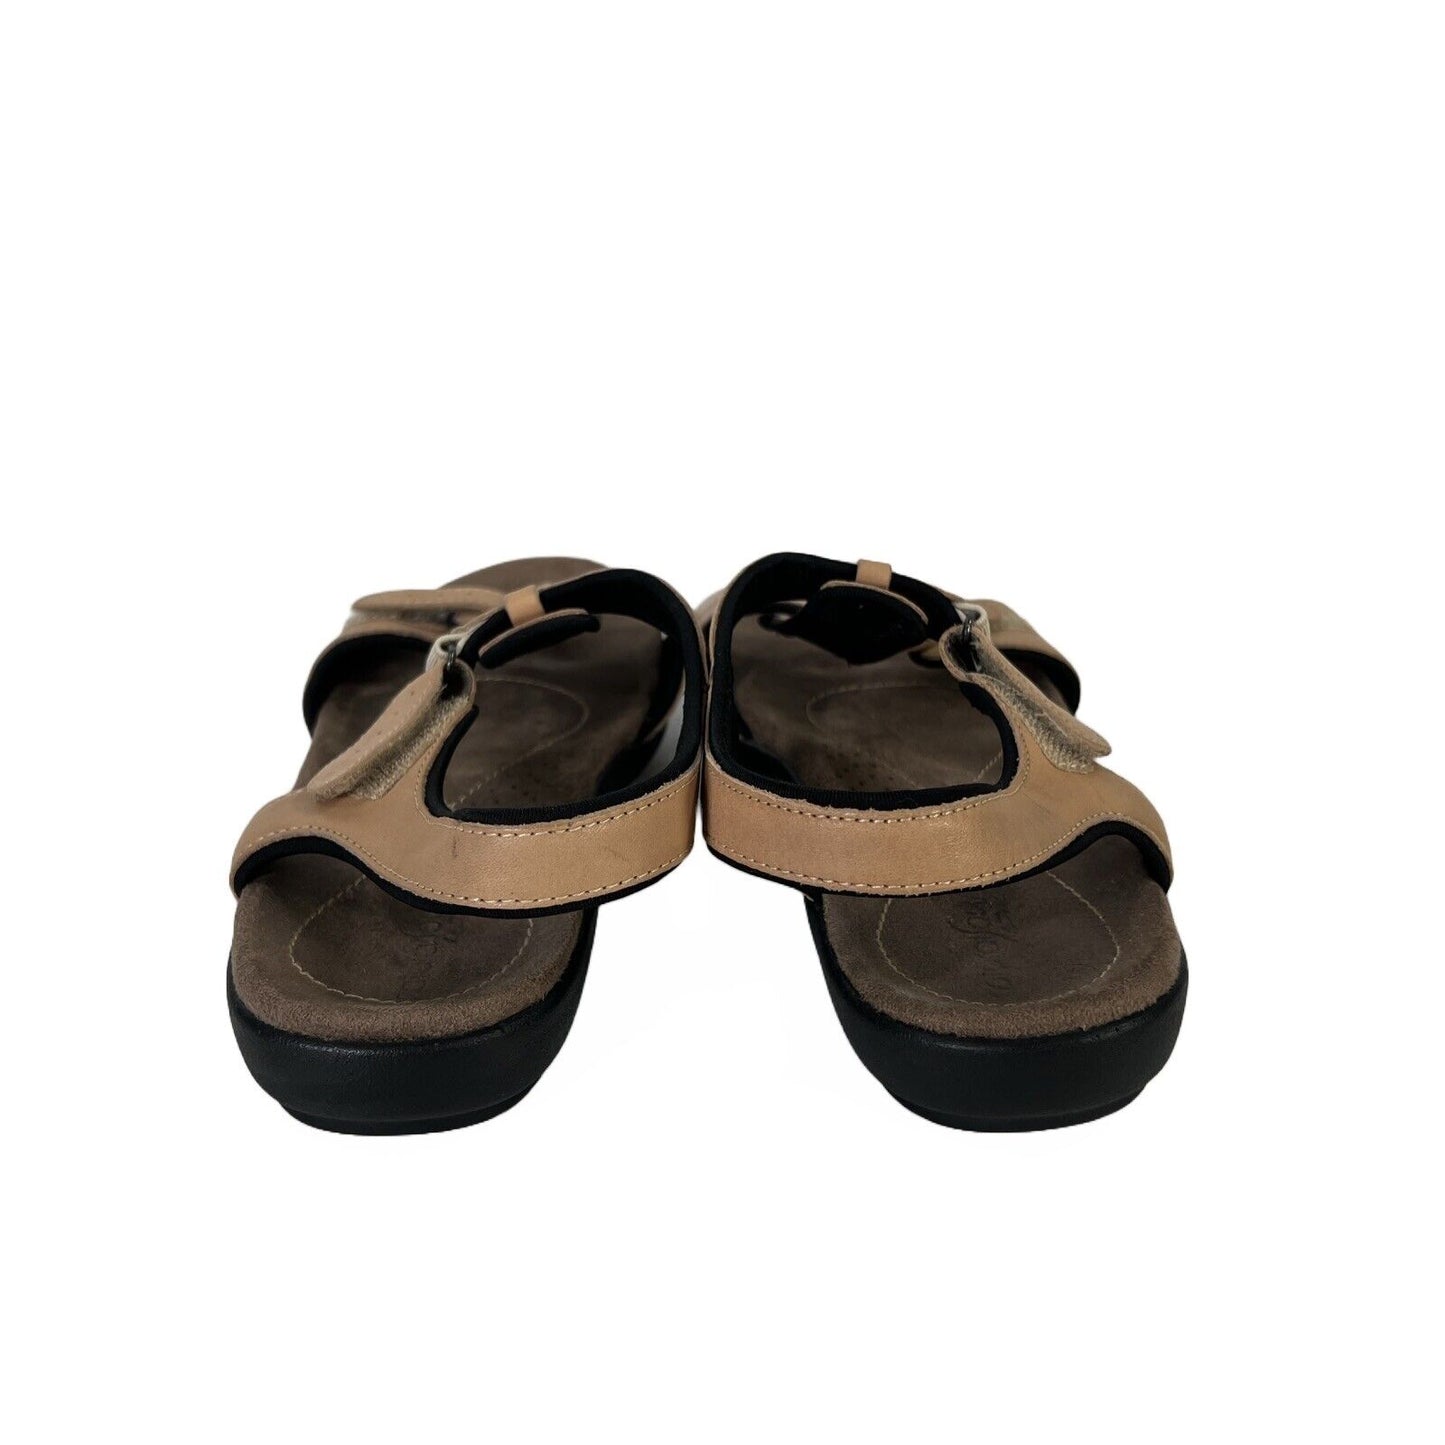 Natural Soul Women's Tan Leather Glenis Open Toe Sandals - 8 Wide